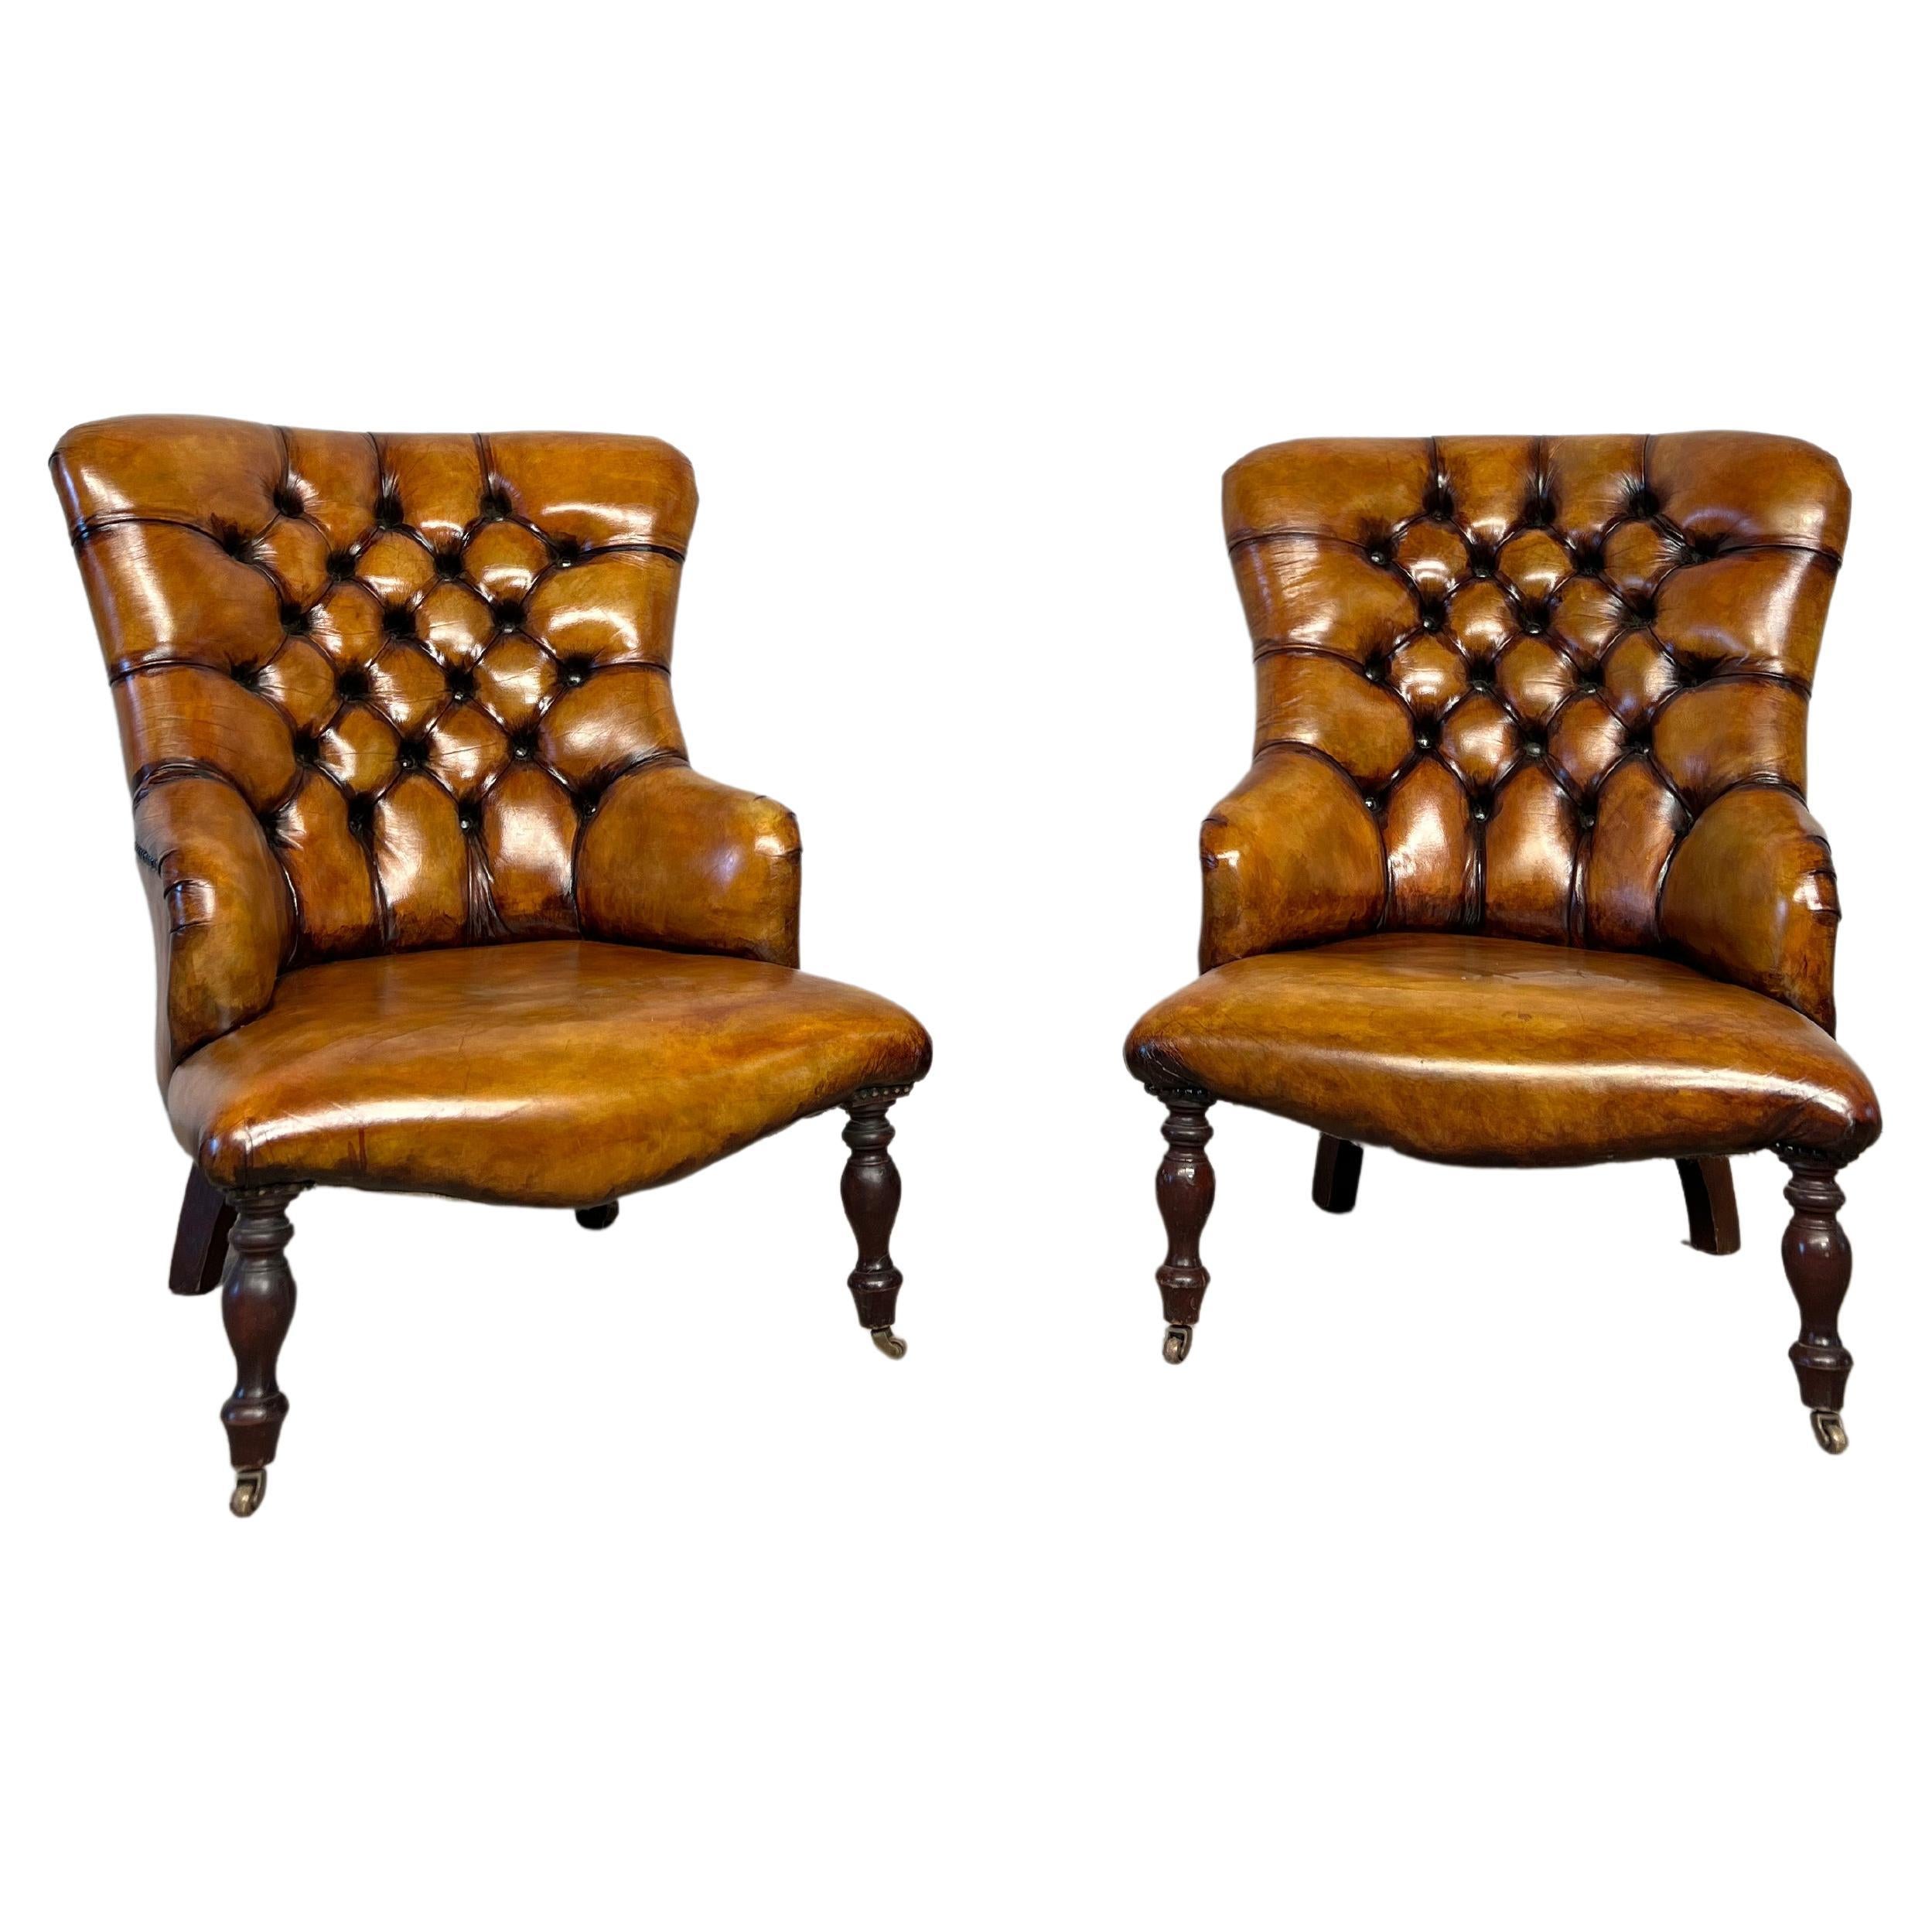 Pair of Leather Fireside Chairs Chesterfield Antique Tan Colour Mid-Century #391 For Sale